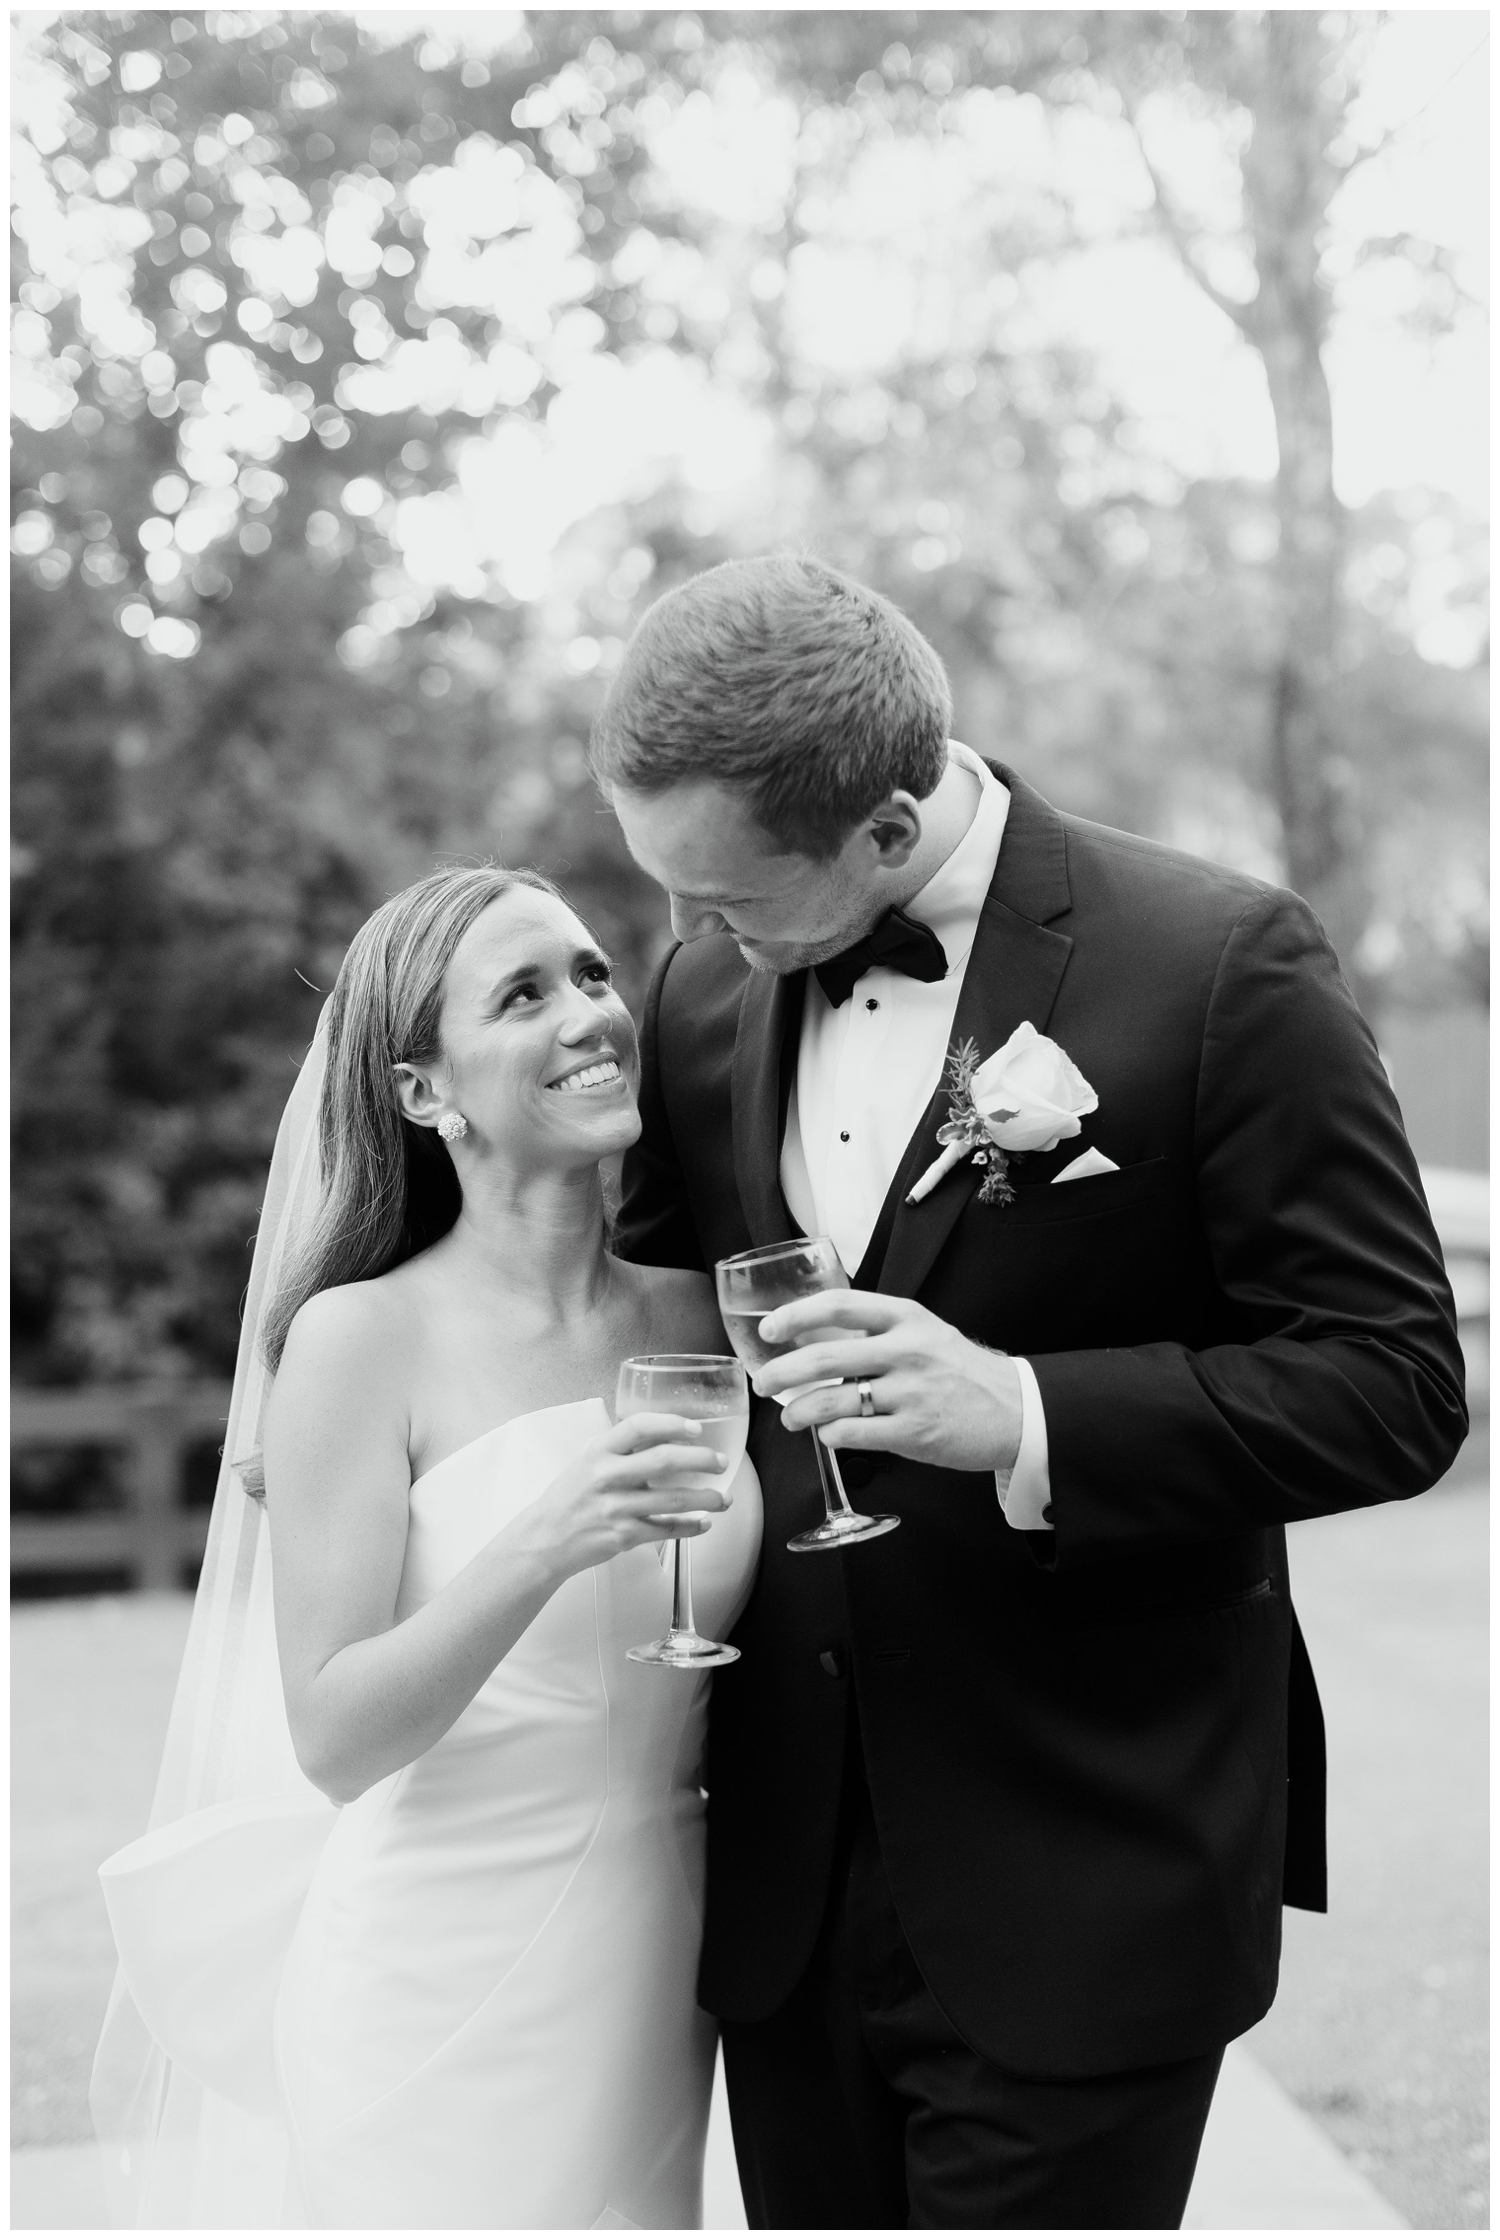 black and white image of bride and groom smiling and holding champagne glasses outdoors